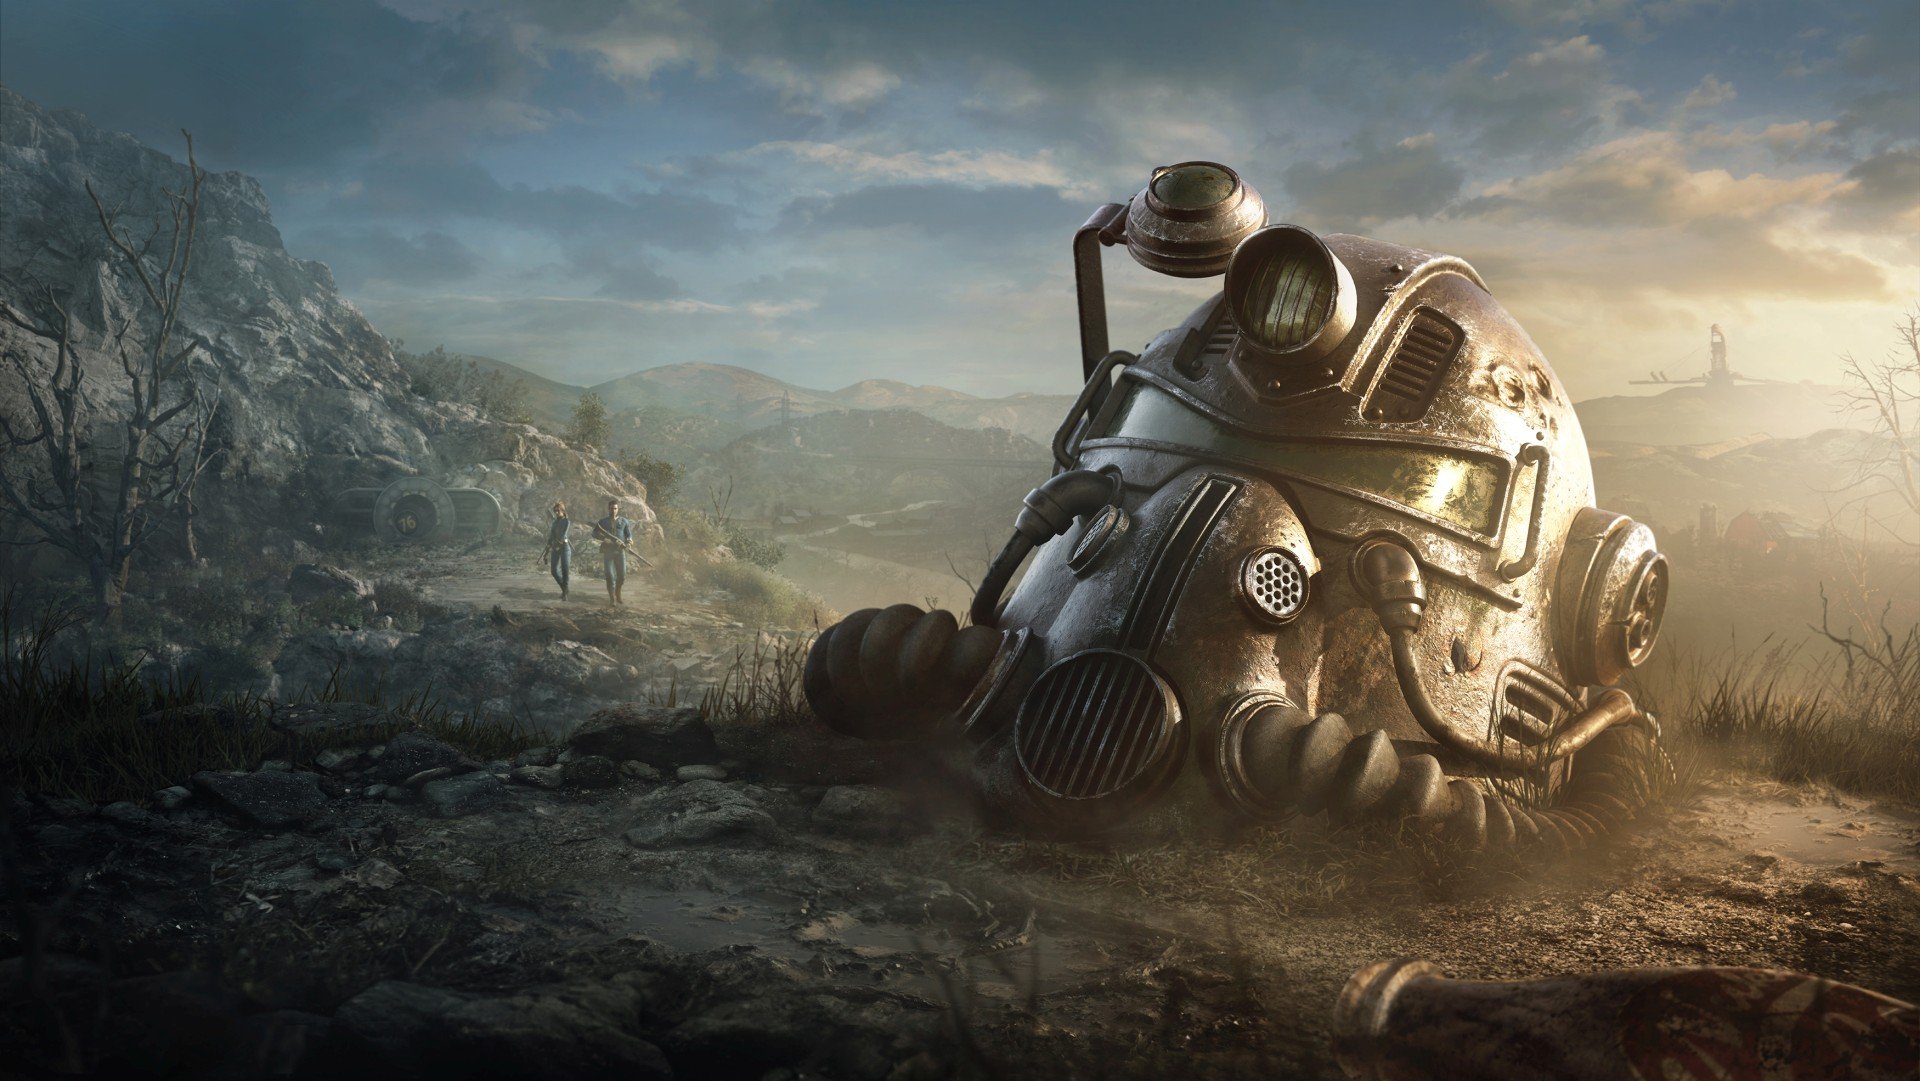 Fallout 76 B.E.T.A arrives on Xbox One on October 23, 2018 Fallout76_Dawn_LowResForPresentations.jpg